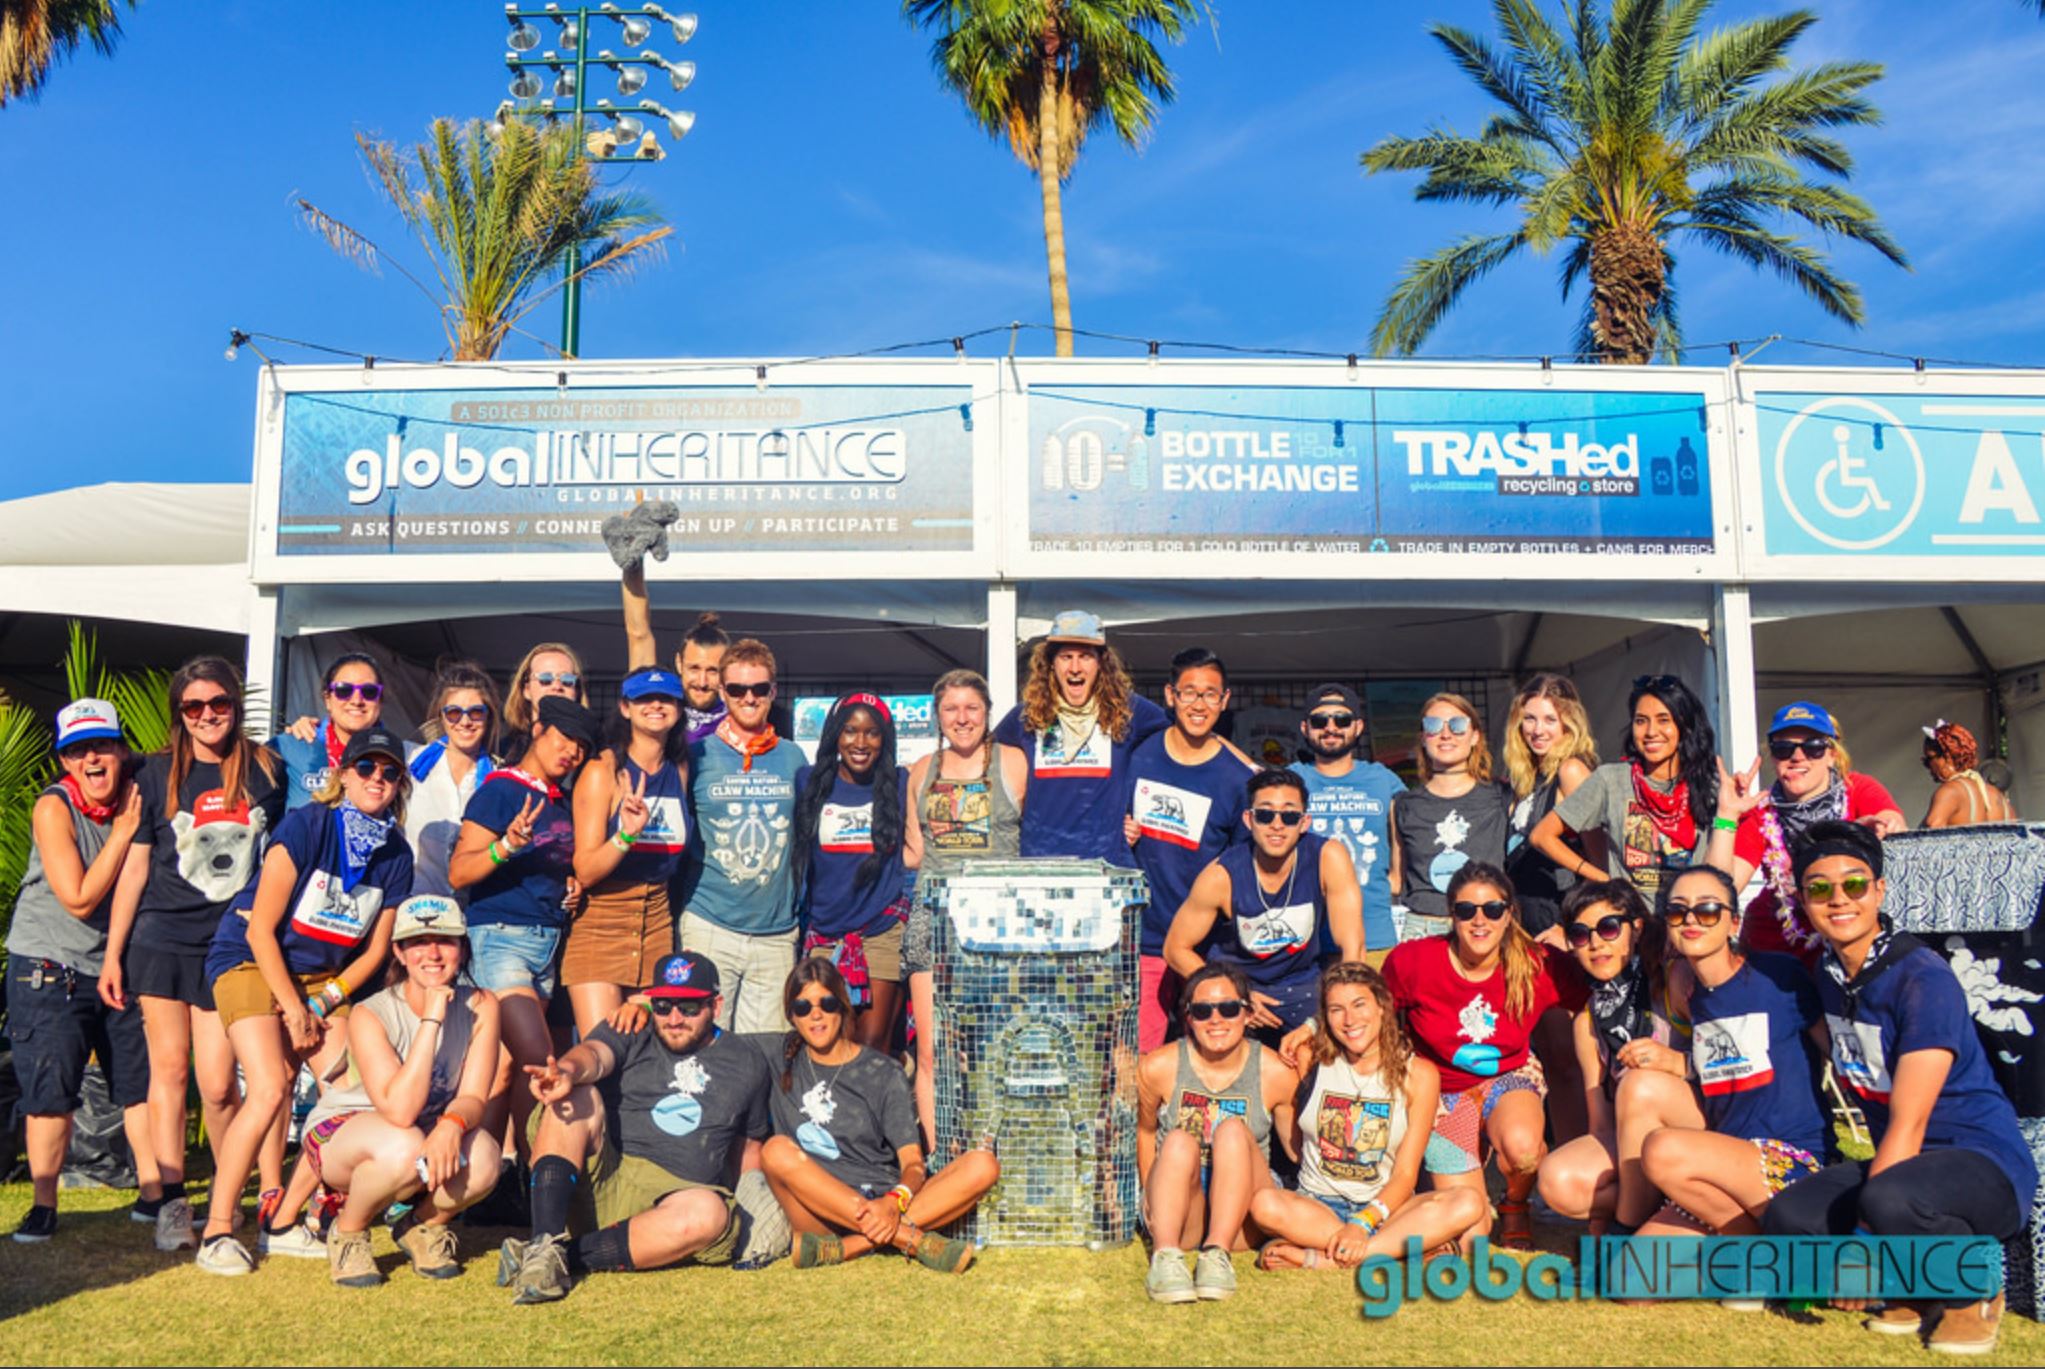 Outreach: Volunteer Manager for Global Inheritance recycling programs at Coachella